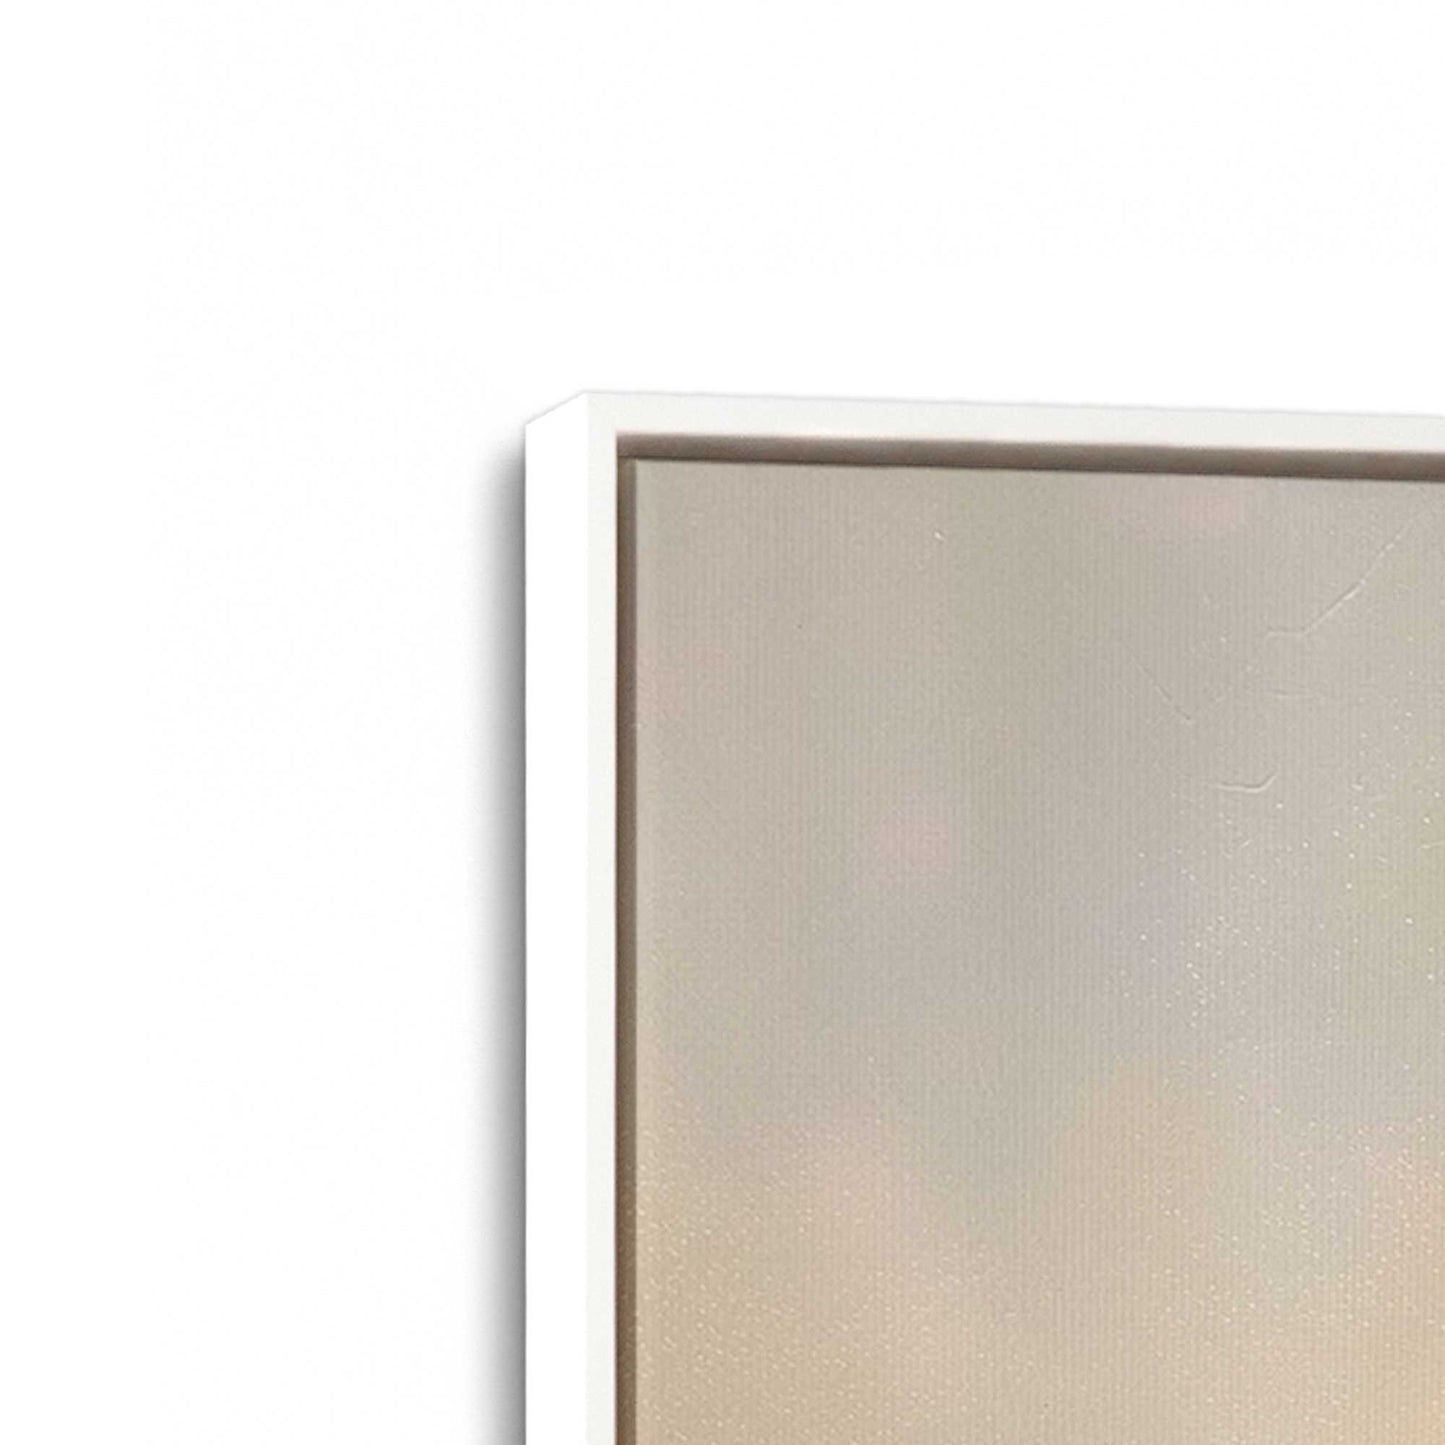 [Color:Opaque White] Picture of the corner of the art